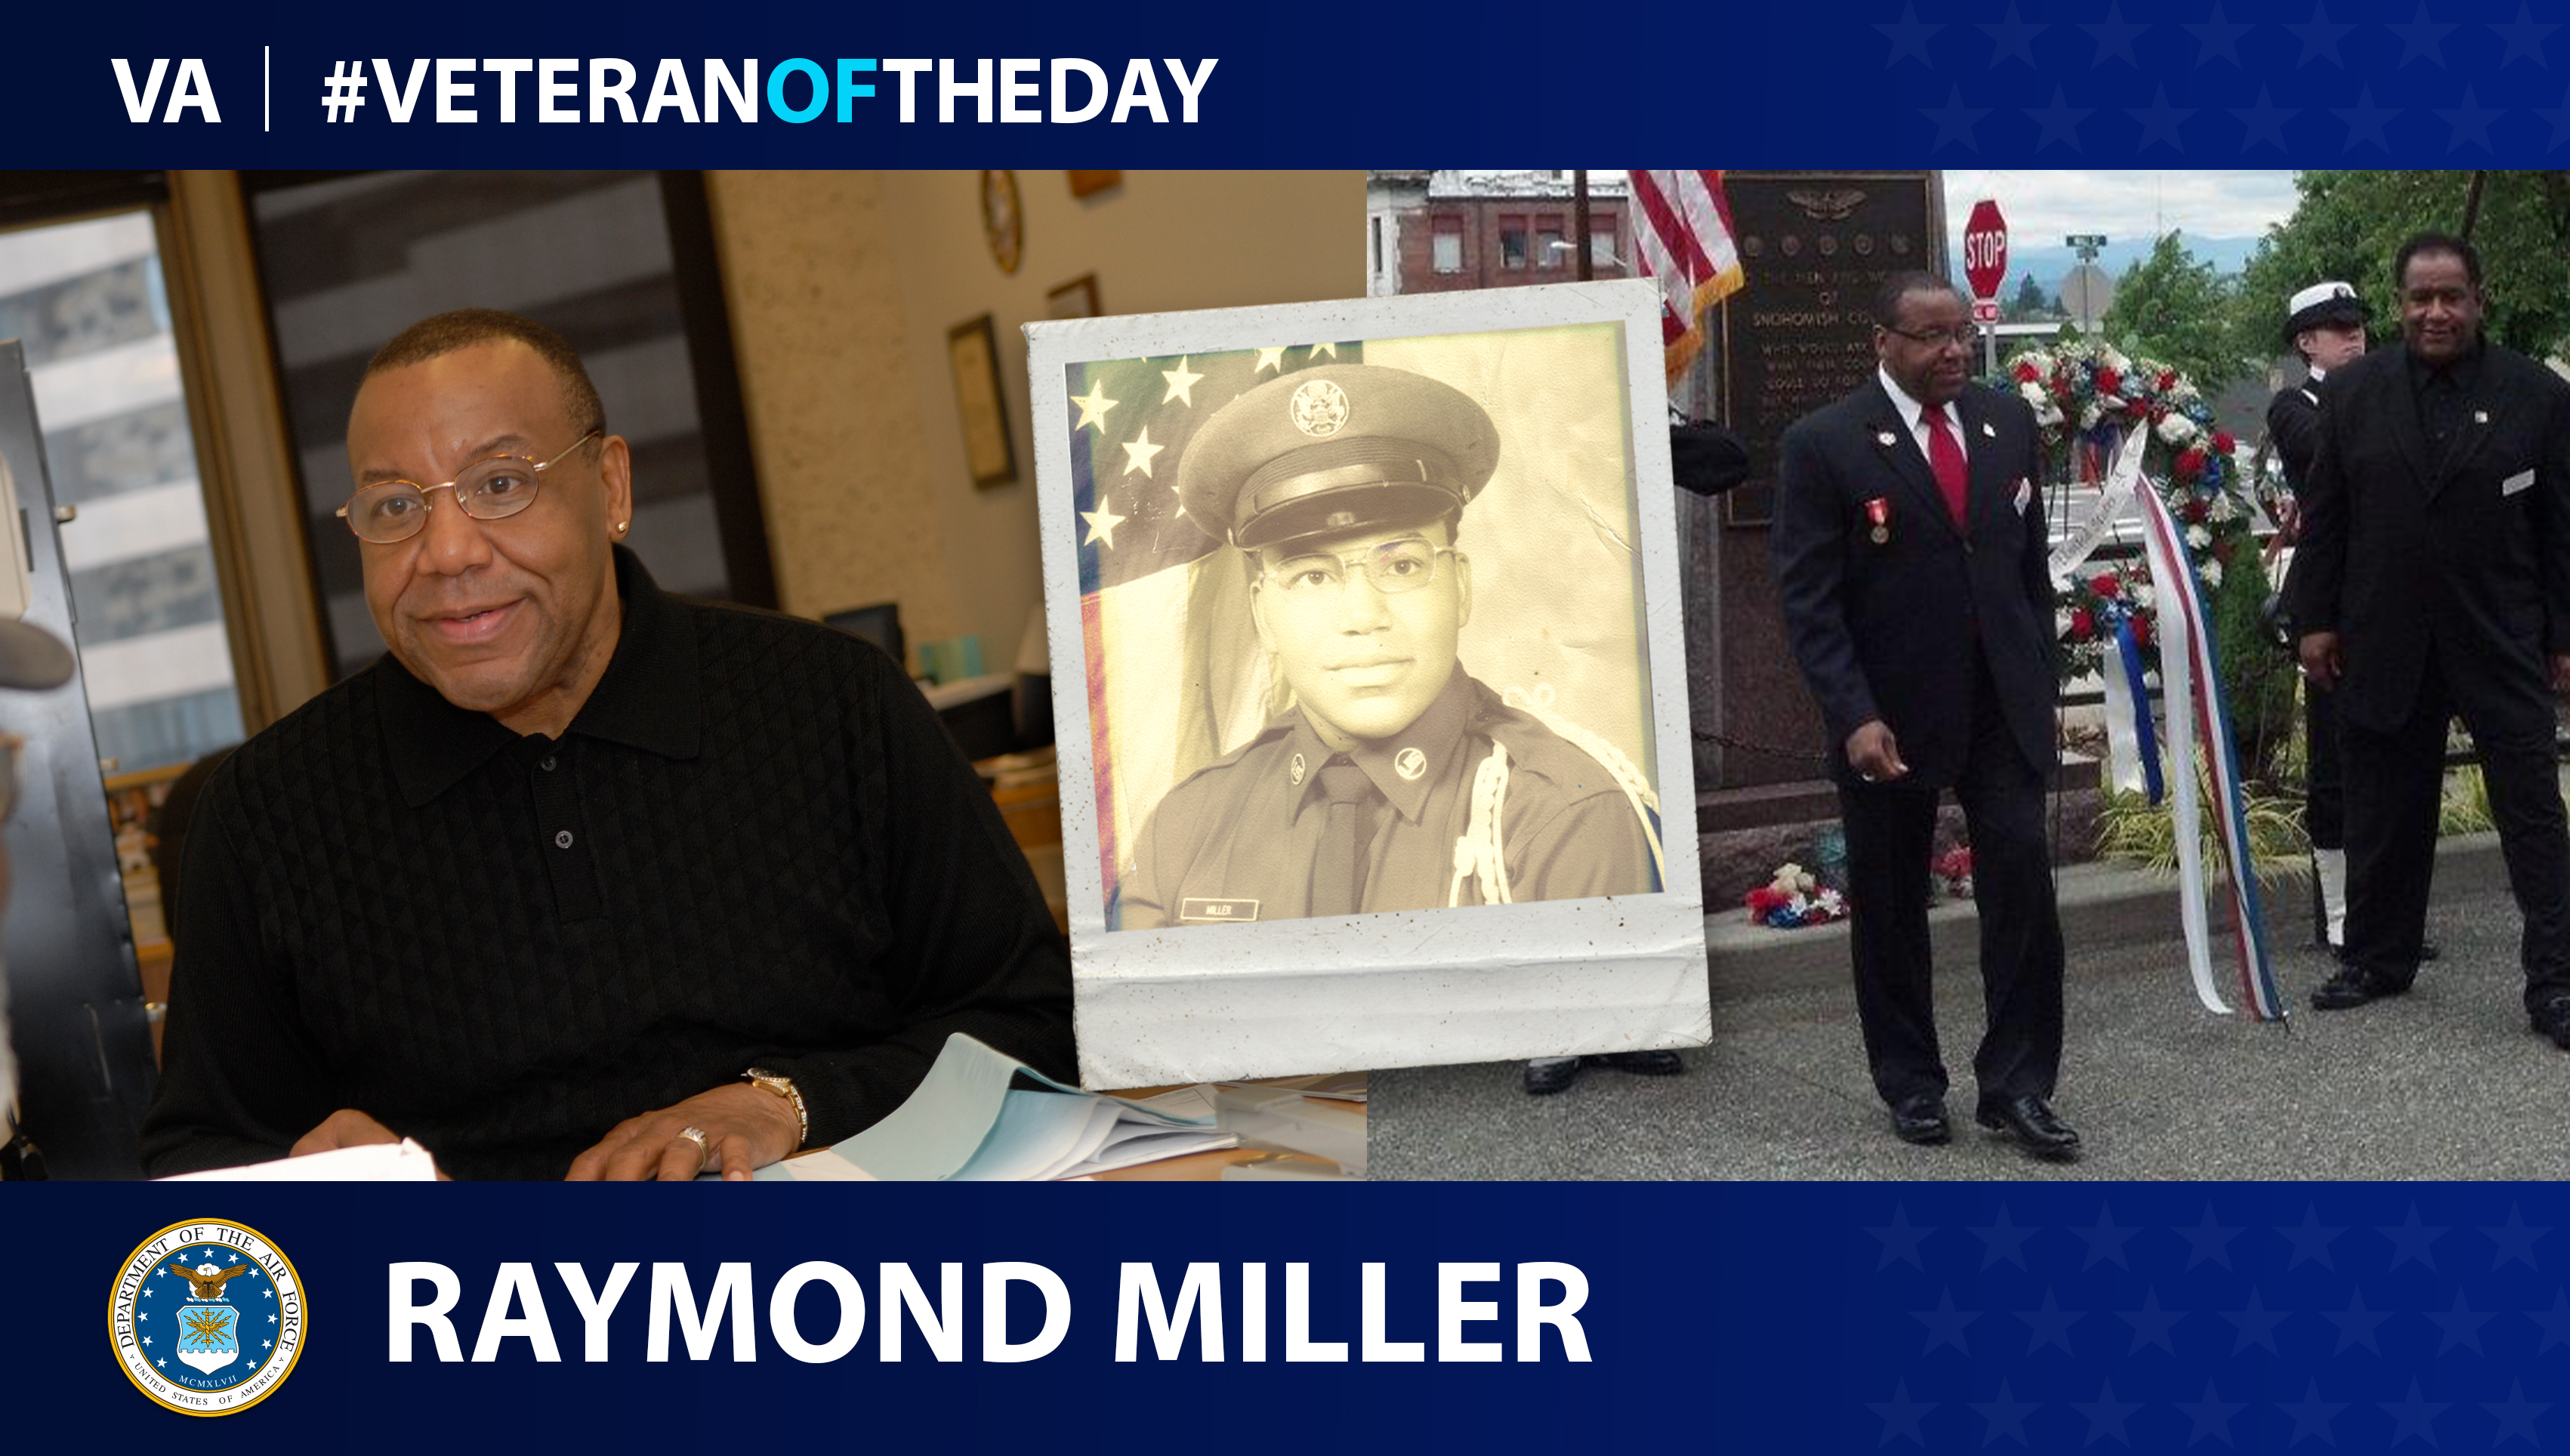 Air Force Veteran Raymond Miller is today's Veteran of the Day.